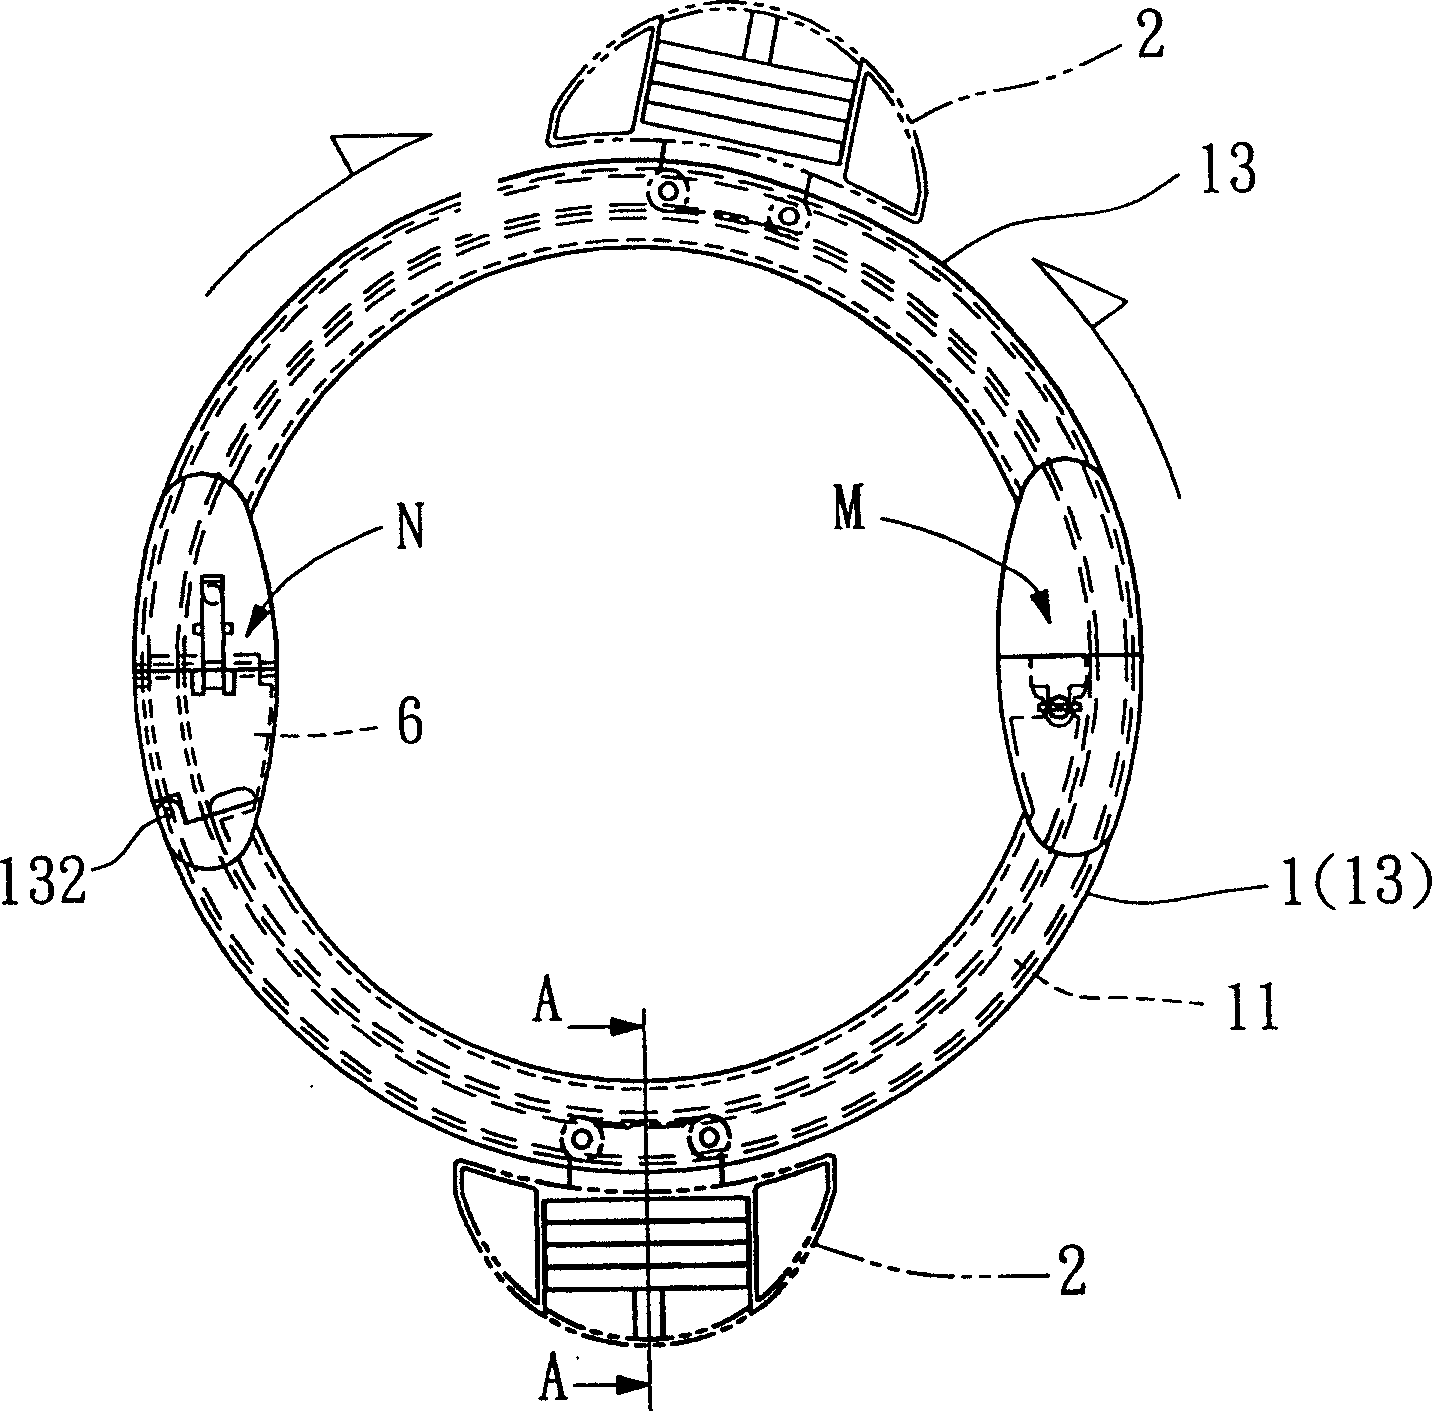 Hula ring with rotary body